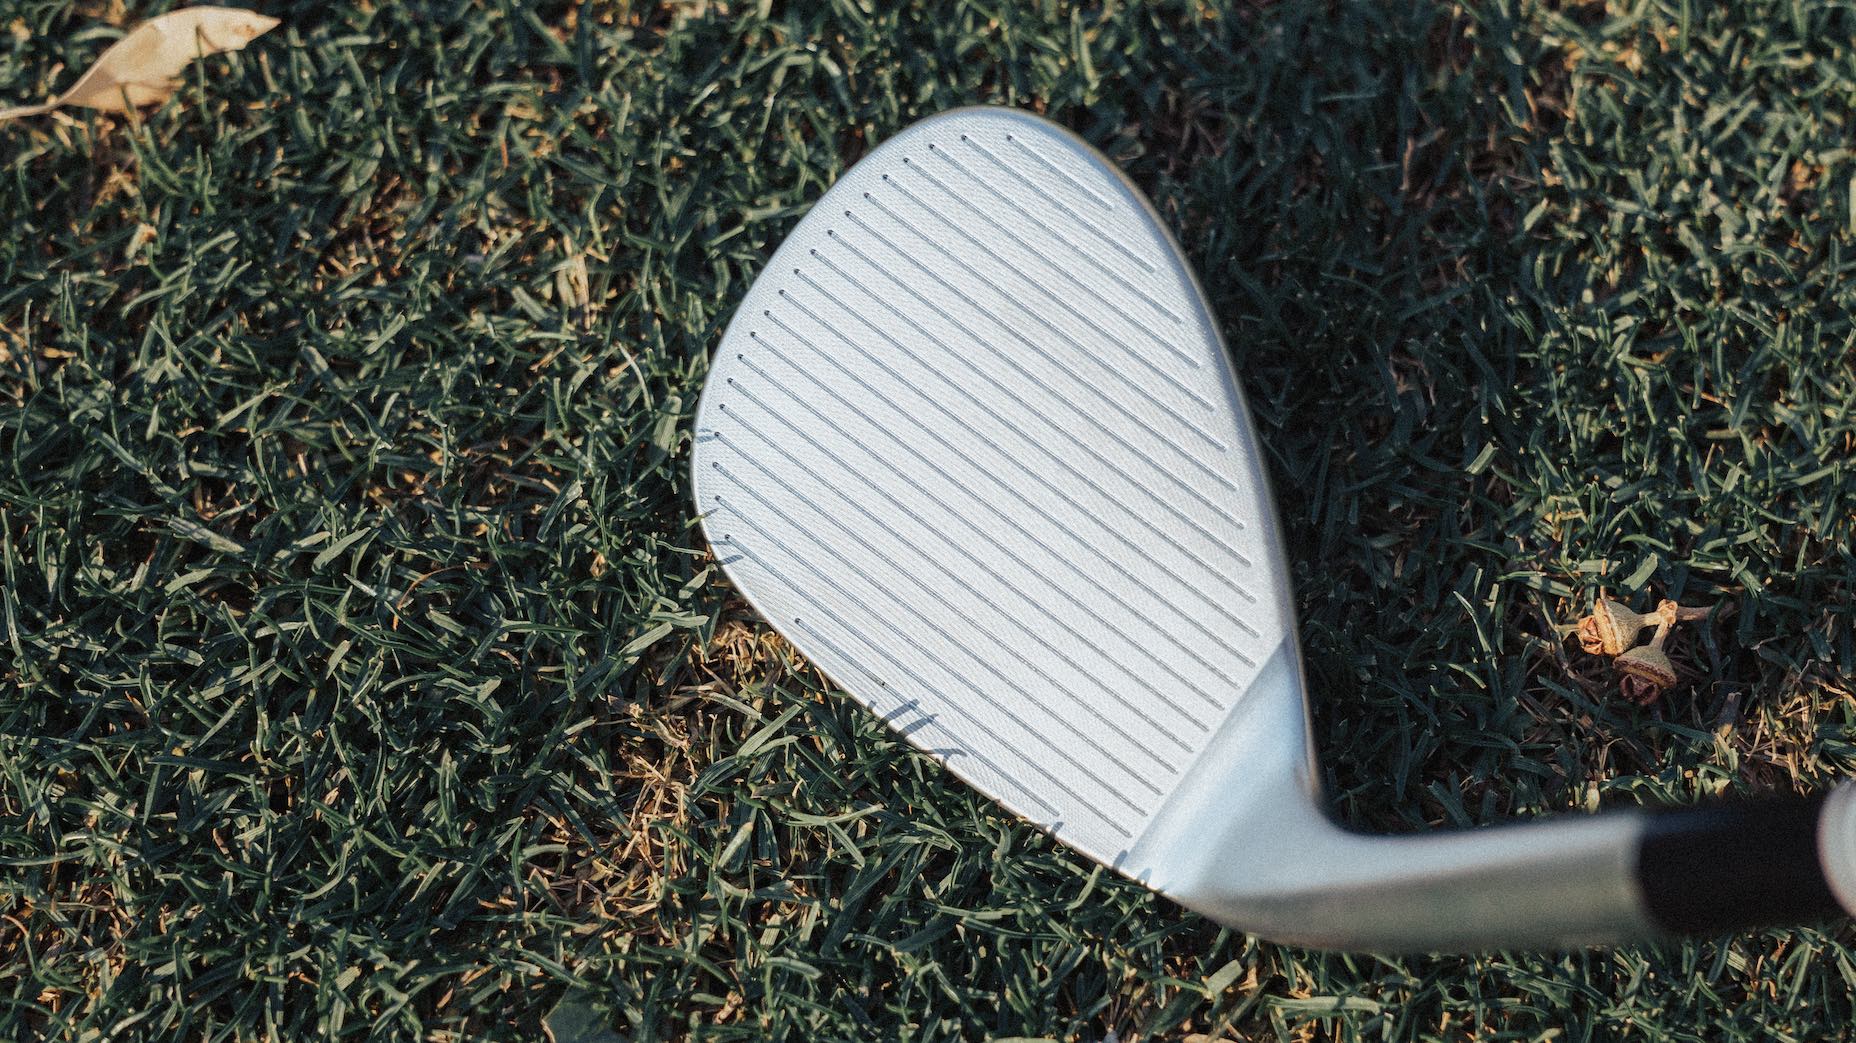 Cleveland Golf's RTX Full-Face wedges: ClubTest First Look